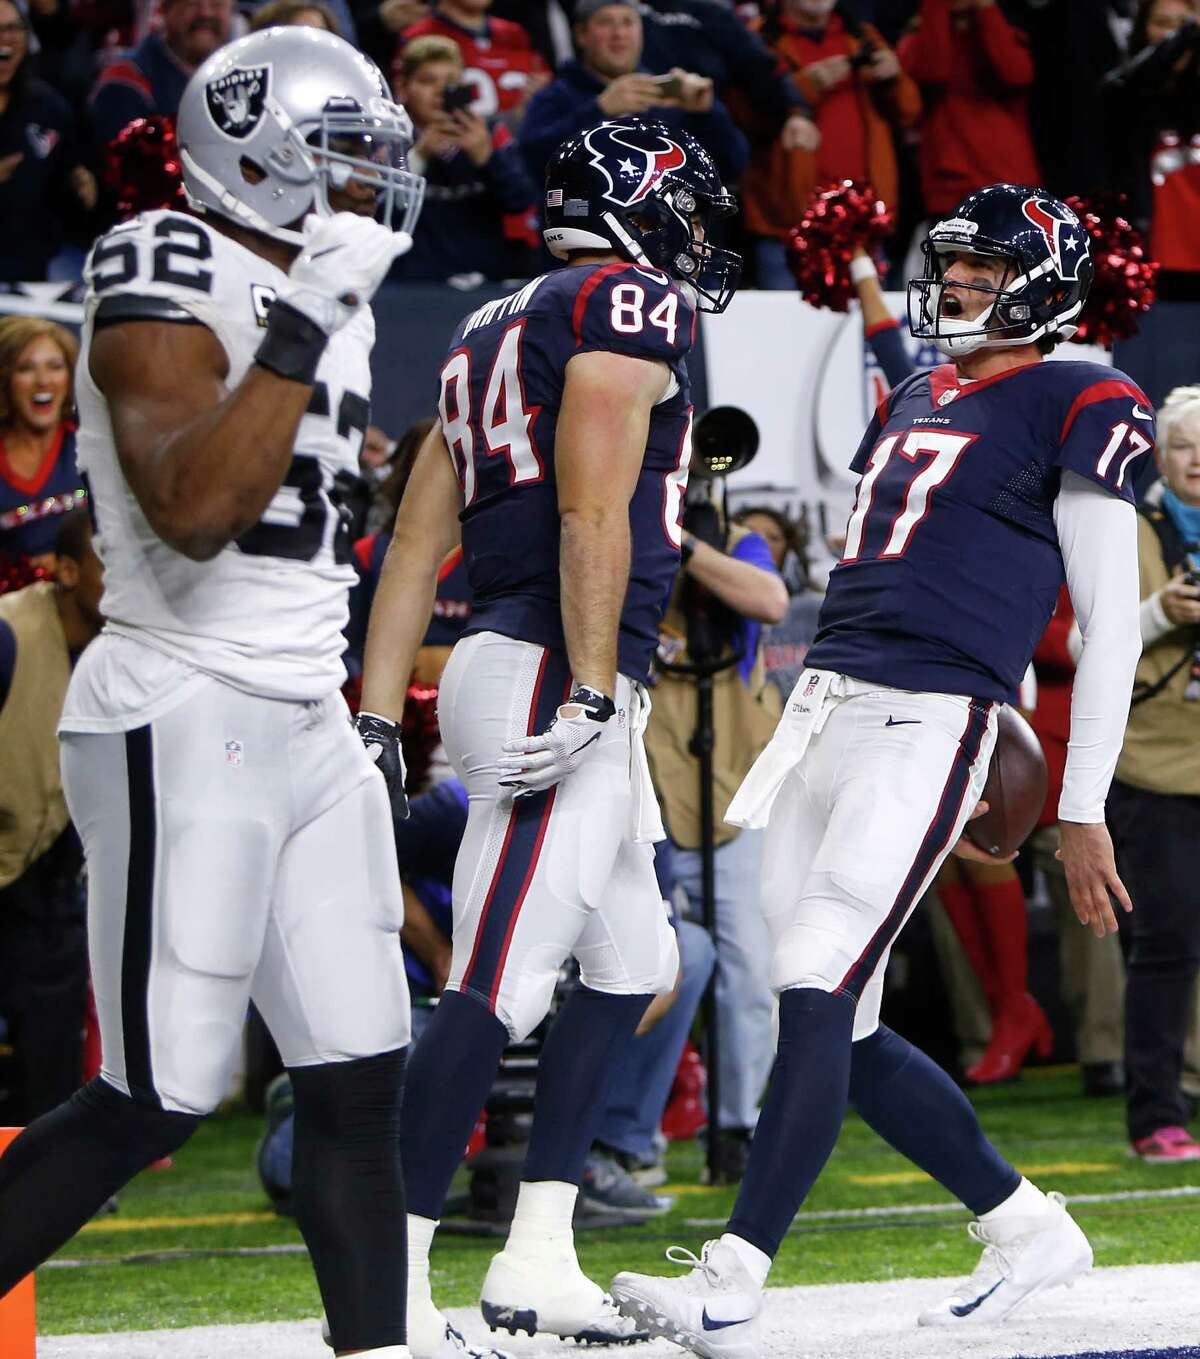 Houston Texans quarterback Brock Osweiler (17) and tight end Ryan Griffin (84) celebrate his the quarterback's 1-yard touchdown run against the Oakland Raiders during the fourth quarter of an AFC Wild Card Playoff game at NRG Stadium on Saturday, Jan. 7, 2017, in Houston.